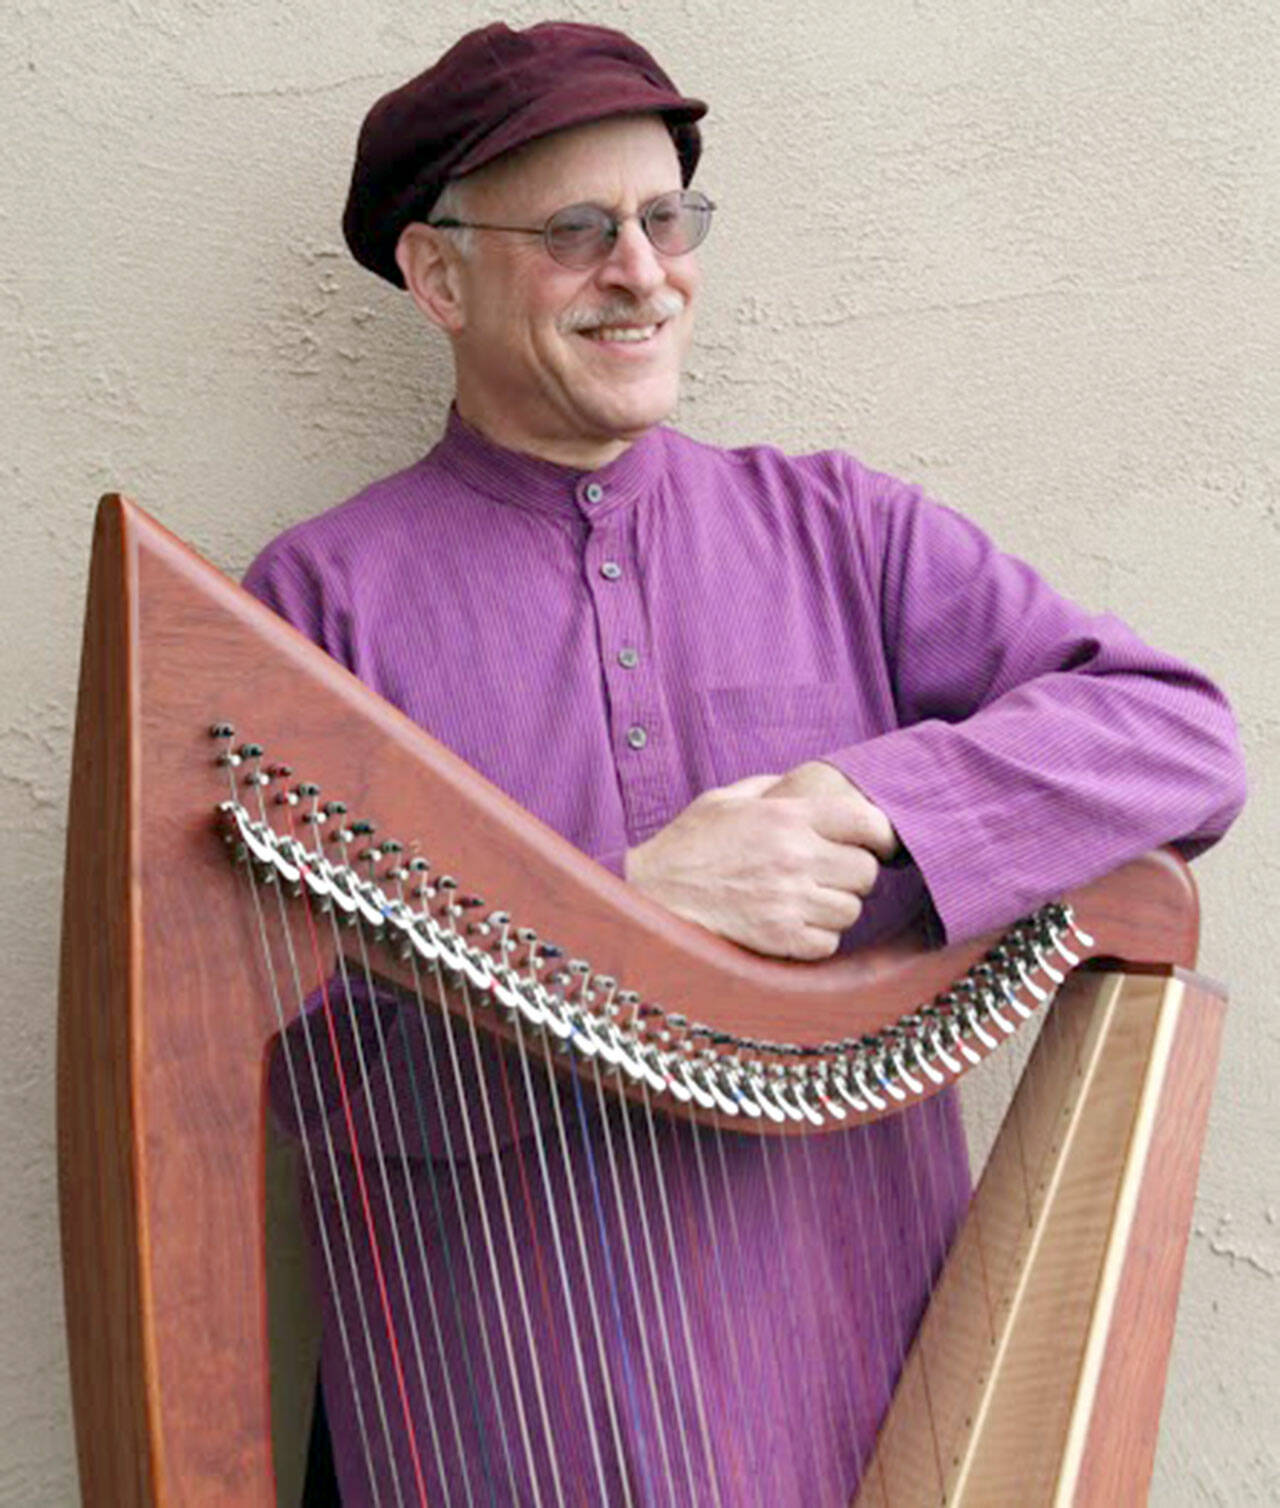 Harpist David Michael will present “Concert for Peace” at 3 p.m. Sunday.